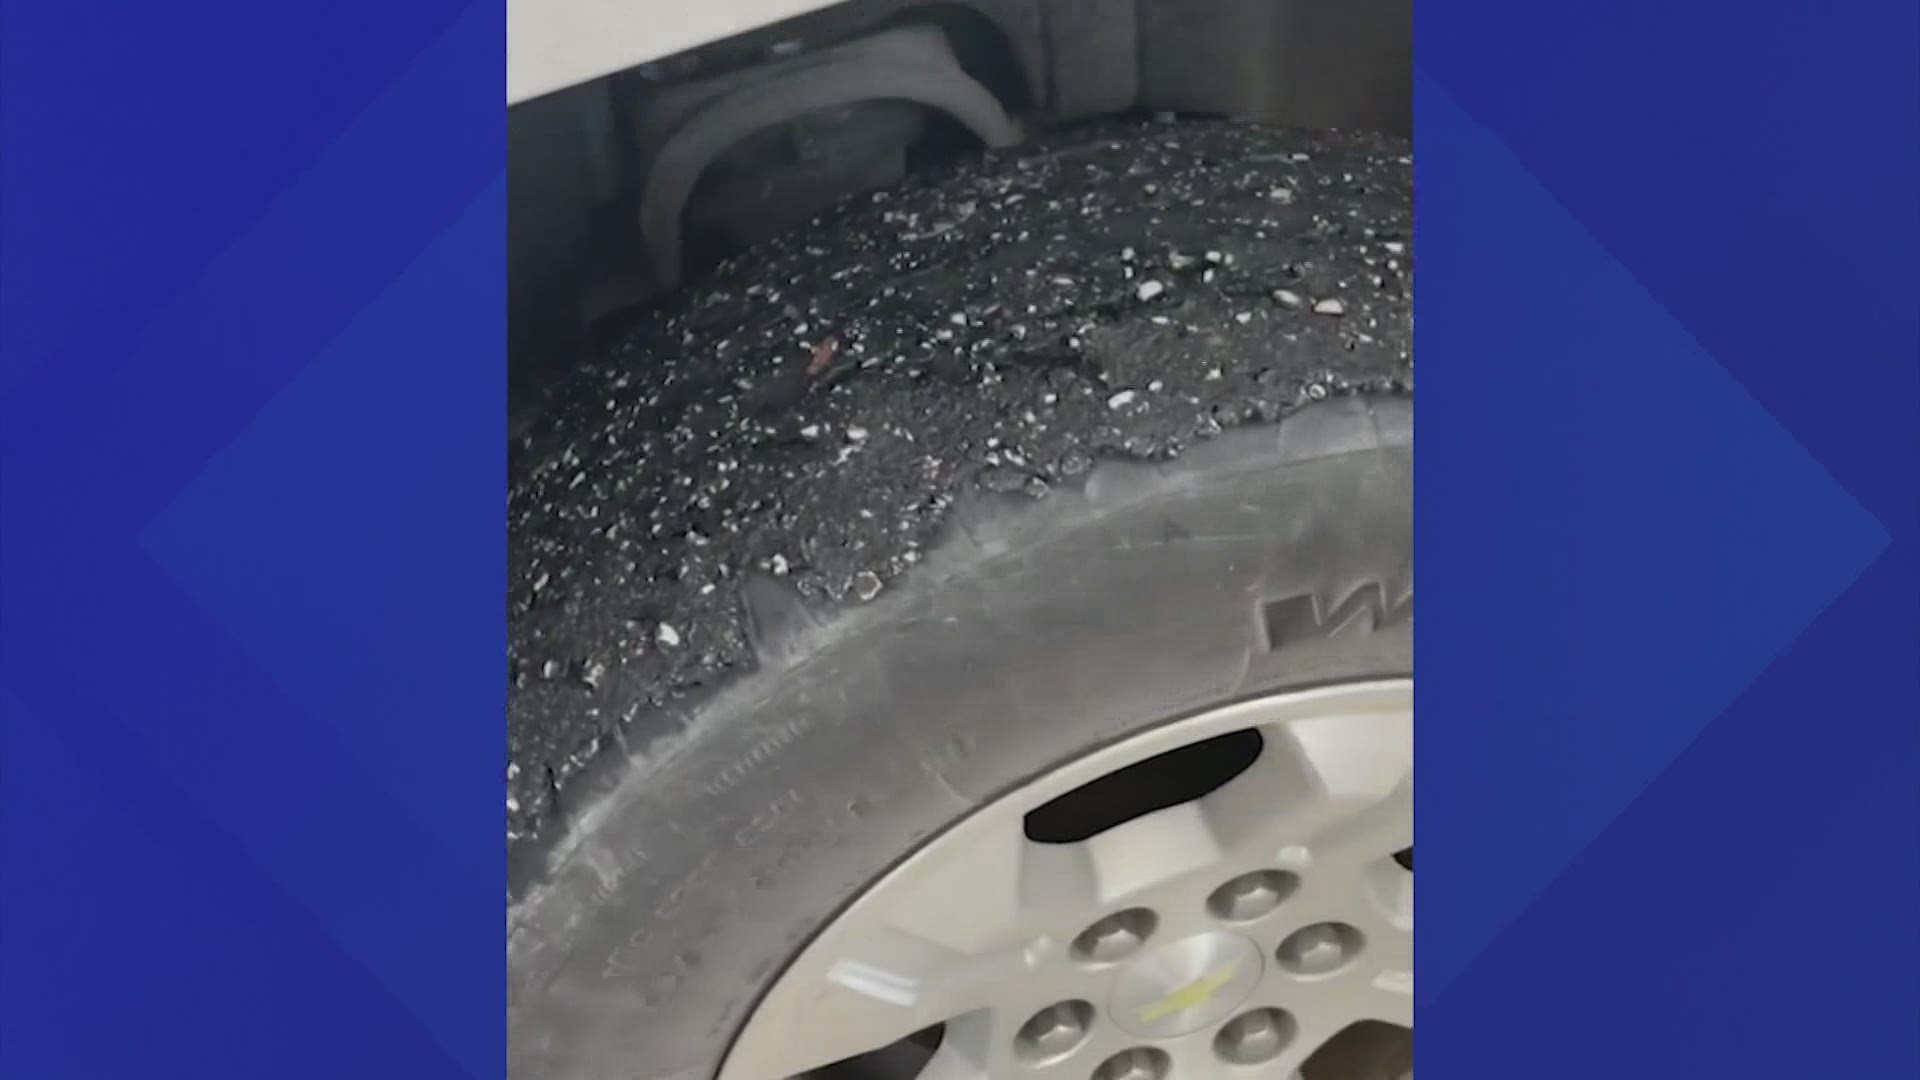 The Brazoria County Sheriff's Office told drivers whose vehicles were damaged to document the damage, call them to get an incident number and then contact TxDOT